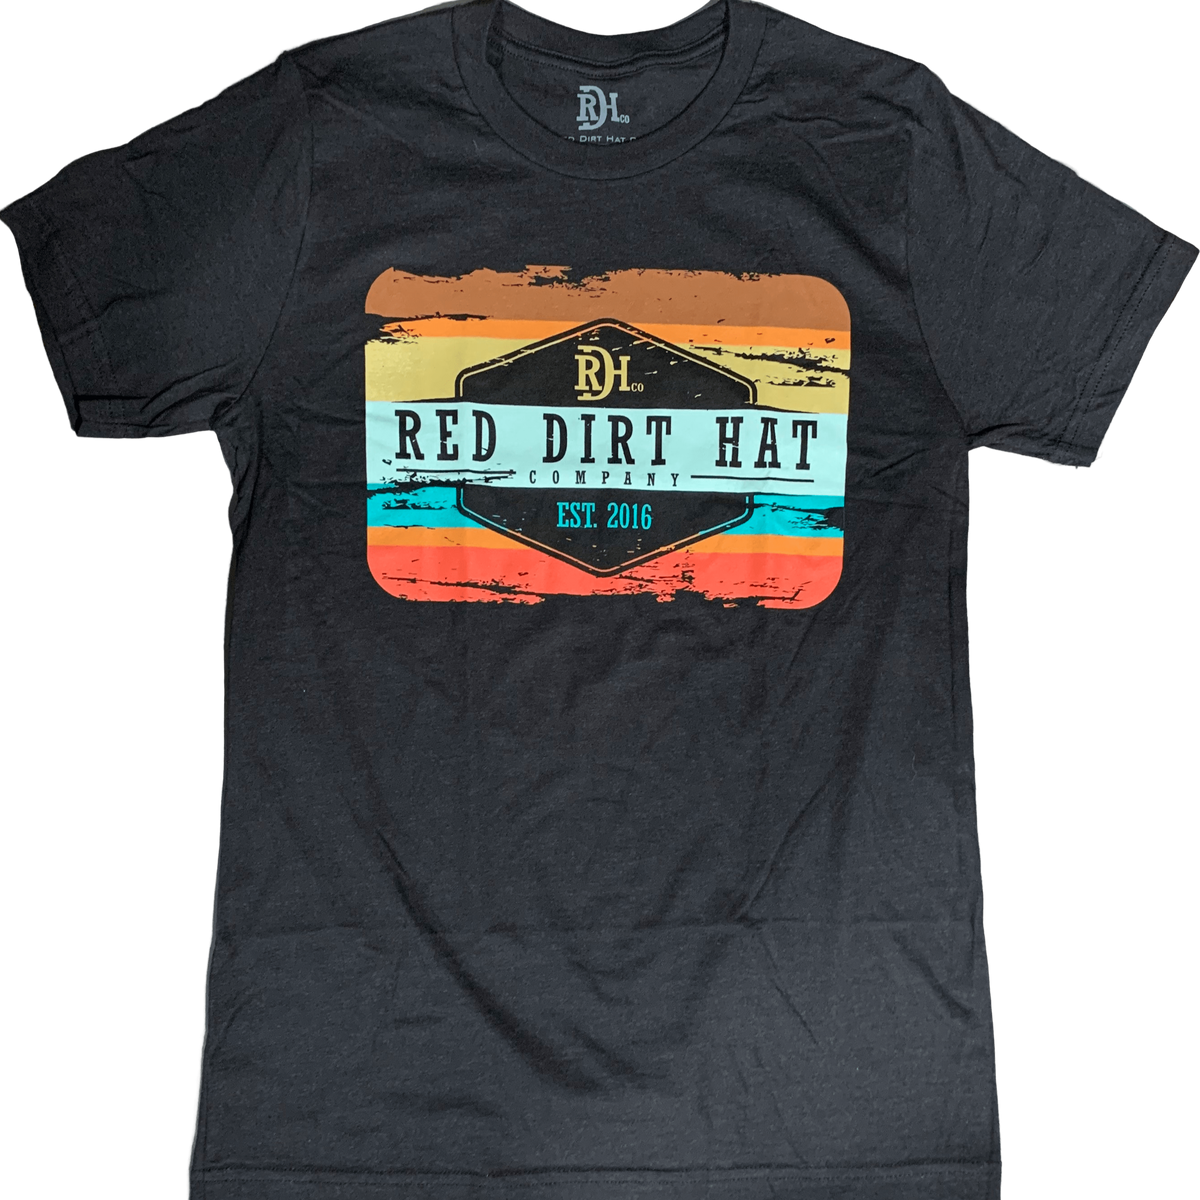 Red Dirt Hat Co. "Army Sunset" T-Shirt